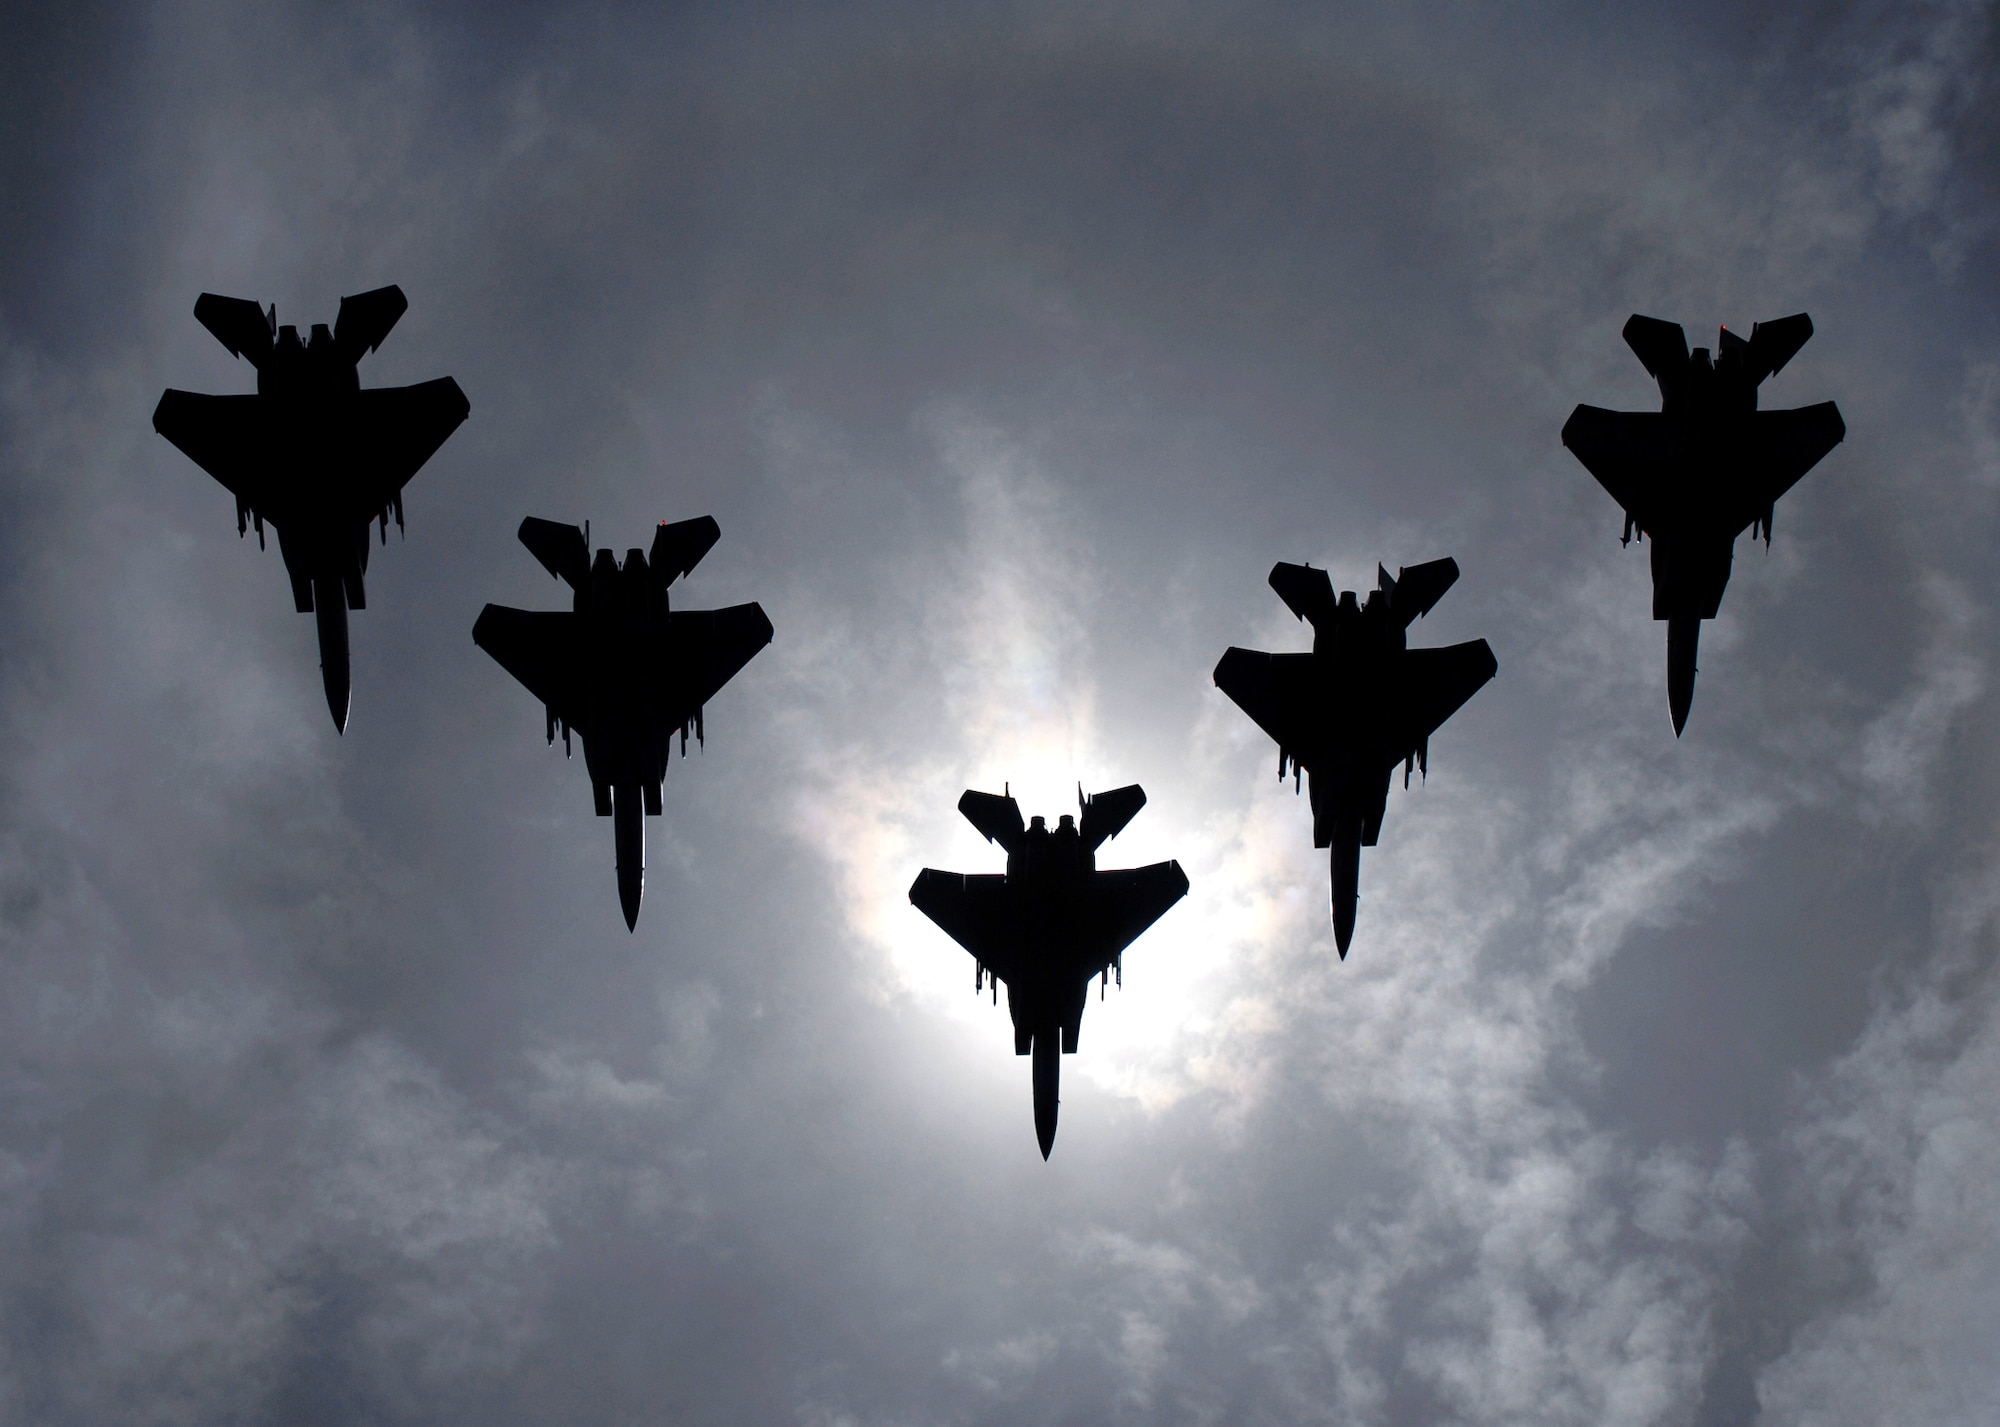 A flight of F-15C Eagles from the 44th Fighter Squadron, Kadena Air Base, Japan, flies during a solar eclipse July 22 over the island of Okinawa. The eclipse was a rare opportunity for servicemembers here to witness this rare event. (U.S. Air Force photo/Airman 1st Class Chad Warren)